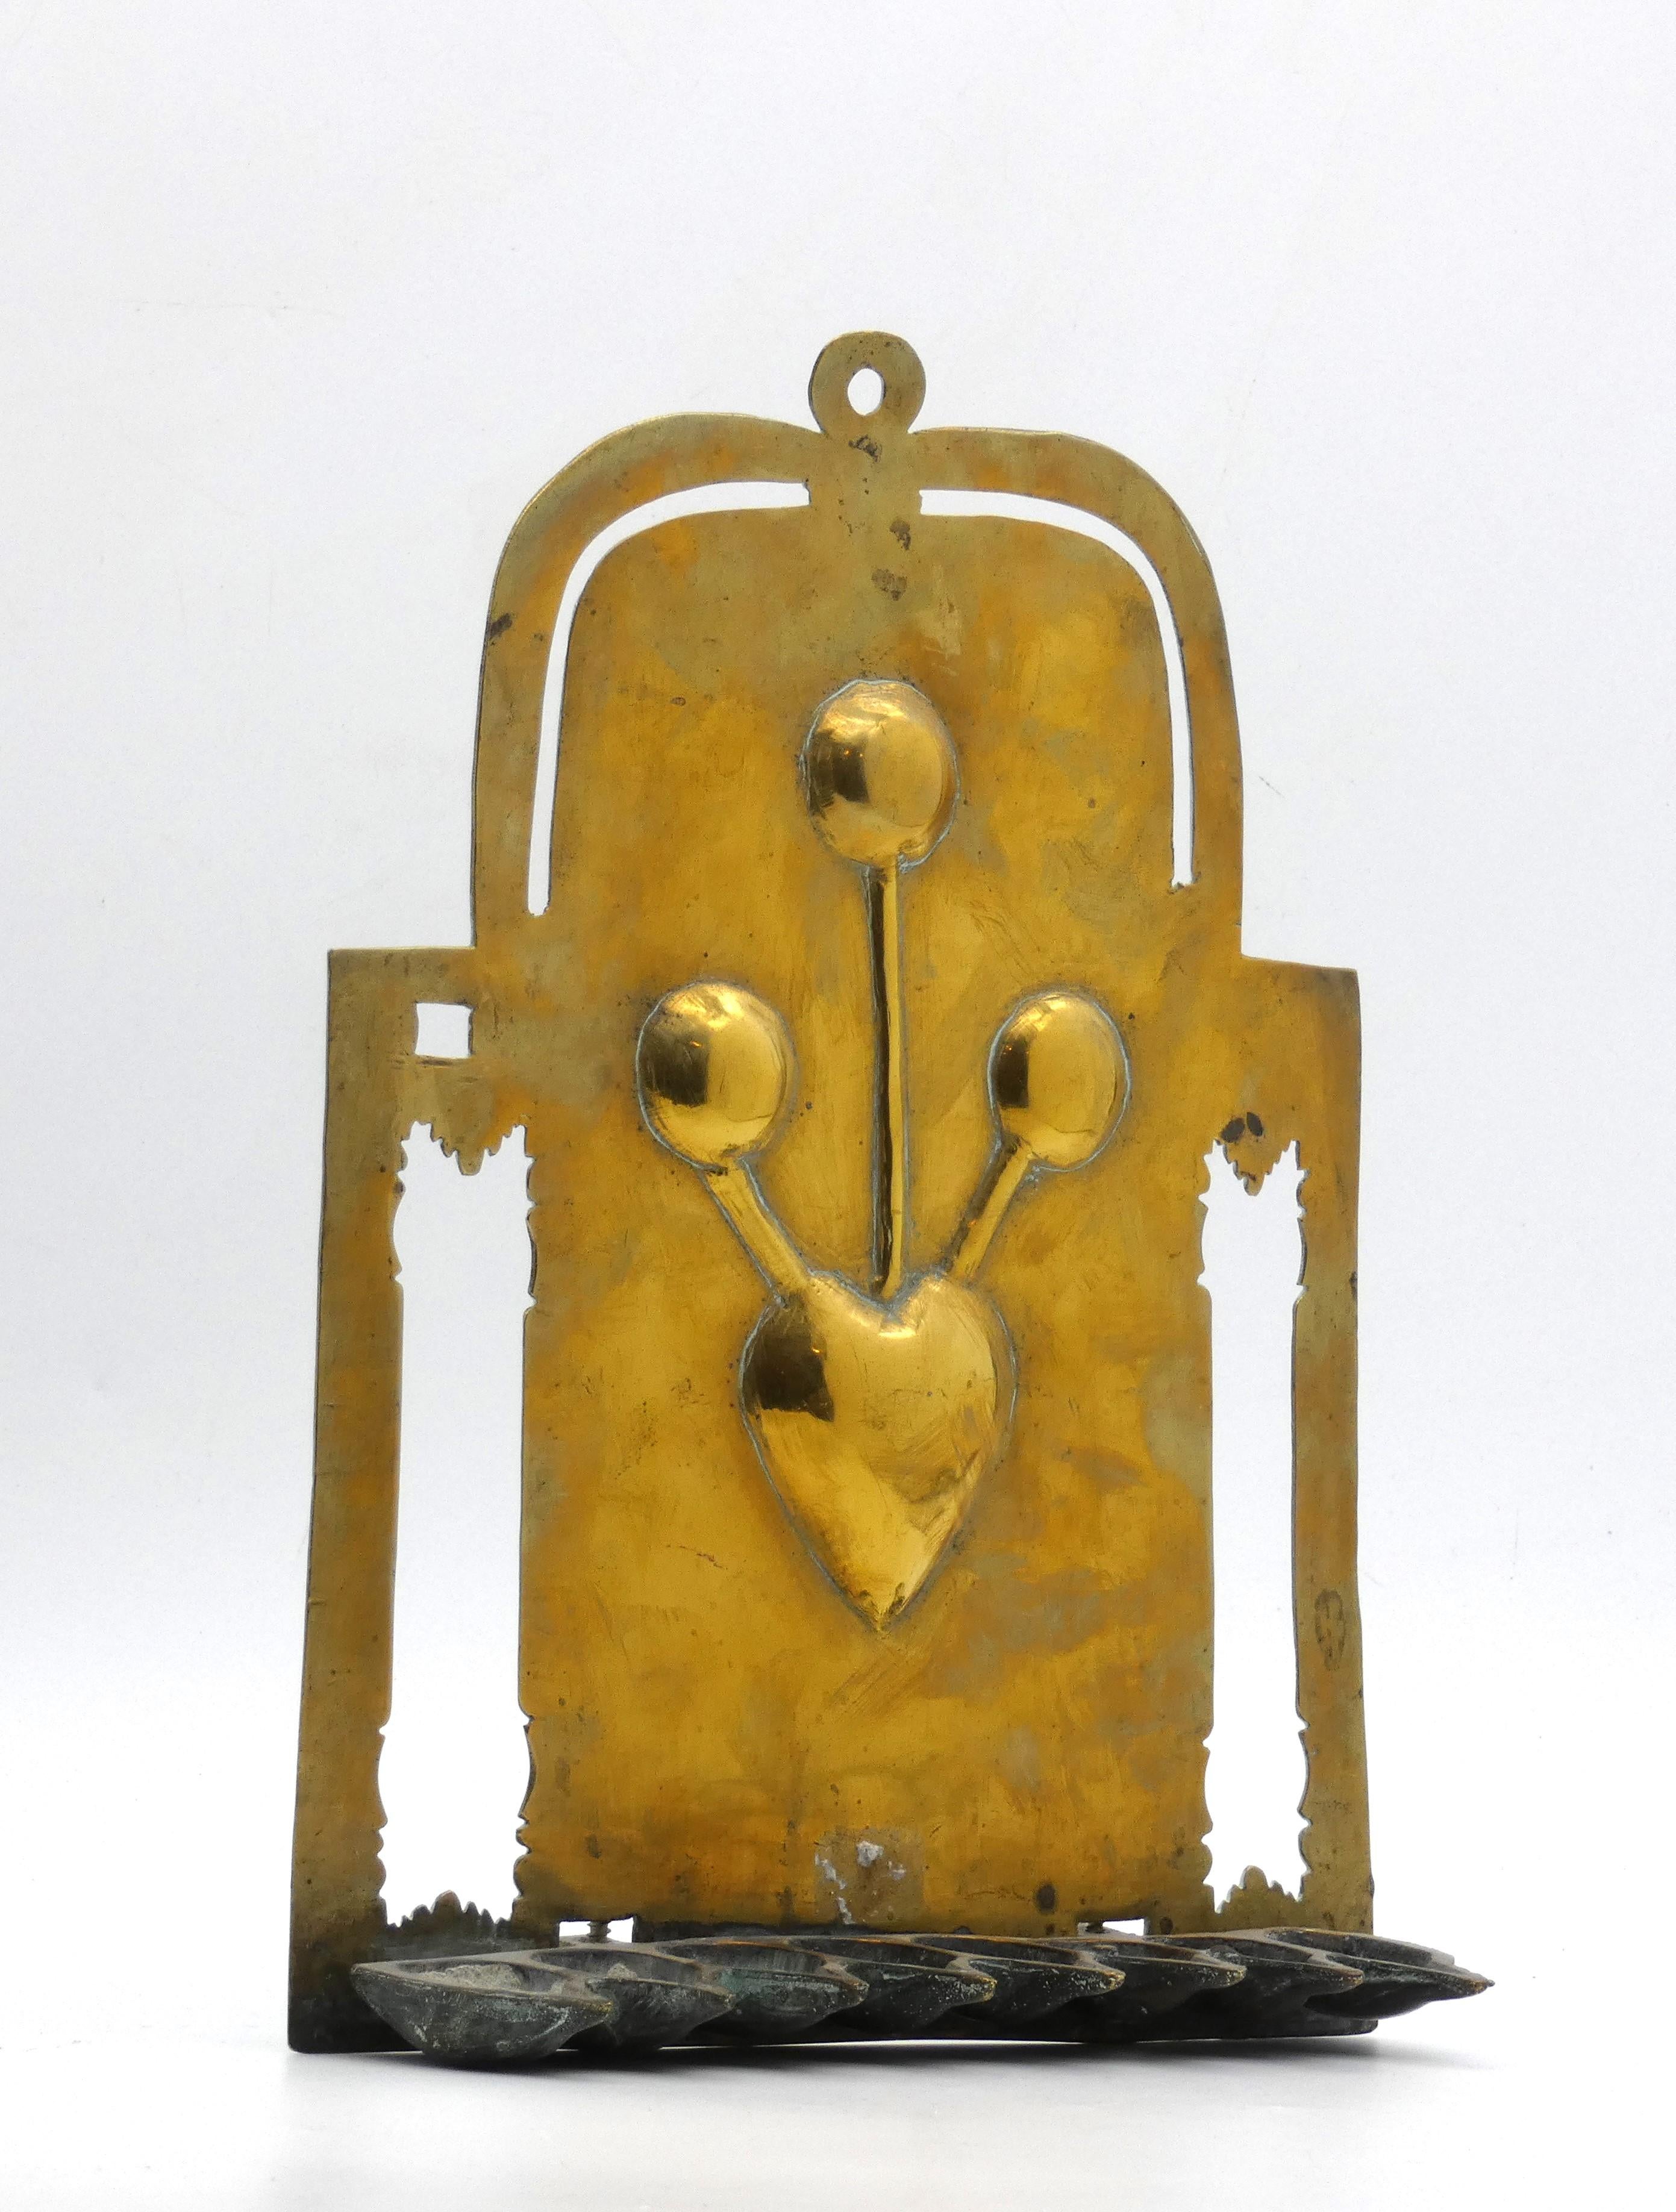 A Unique Brass Hanukkah Lamp from the Netherlands made in the  19th Century.

This uncommon Hanukkah lamp's lower square backplate is framed by its foliate piercings flanking the center heart-shaped design with flower bulbs seemingly sprouting from